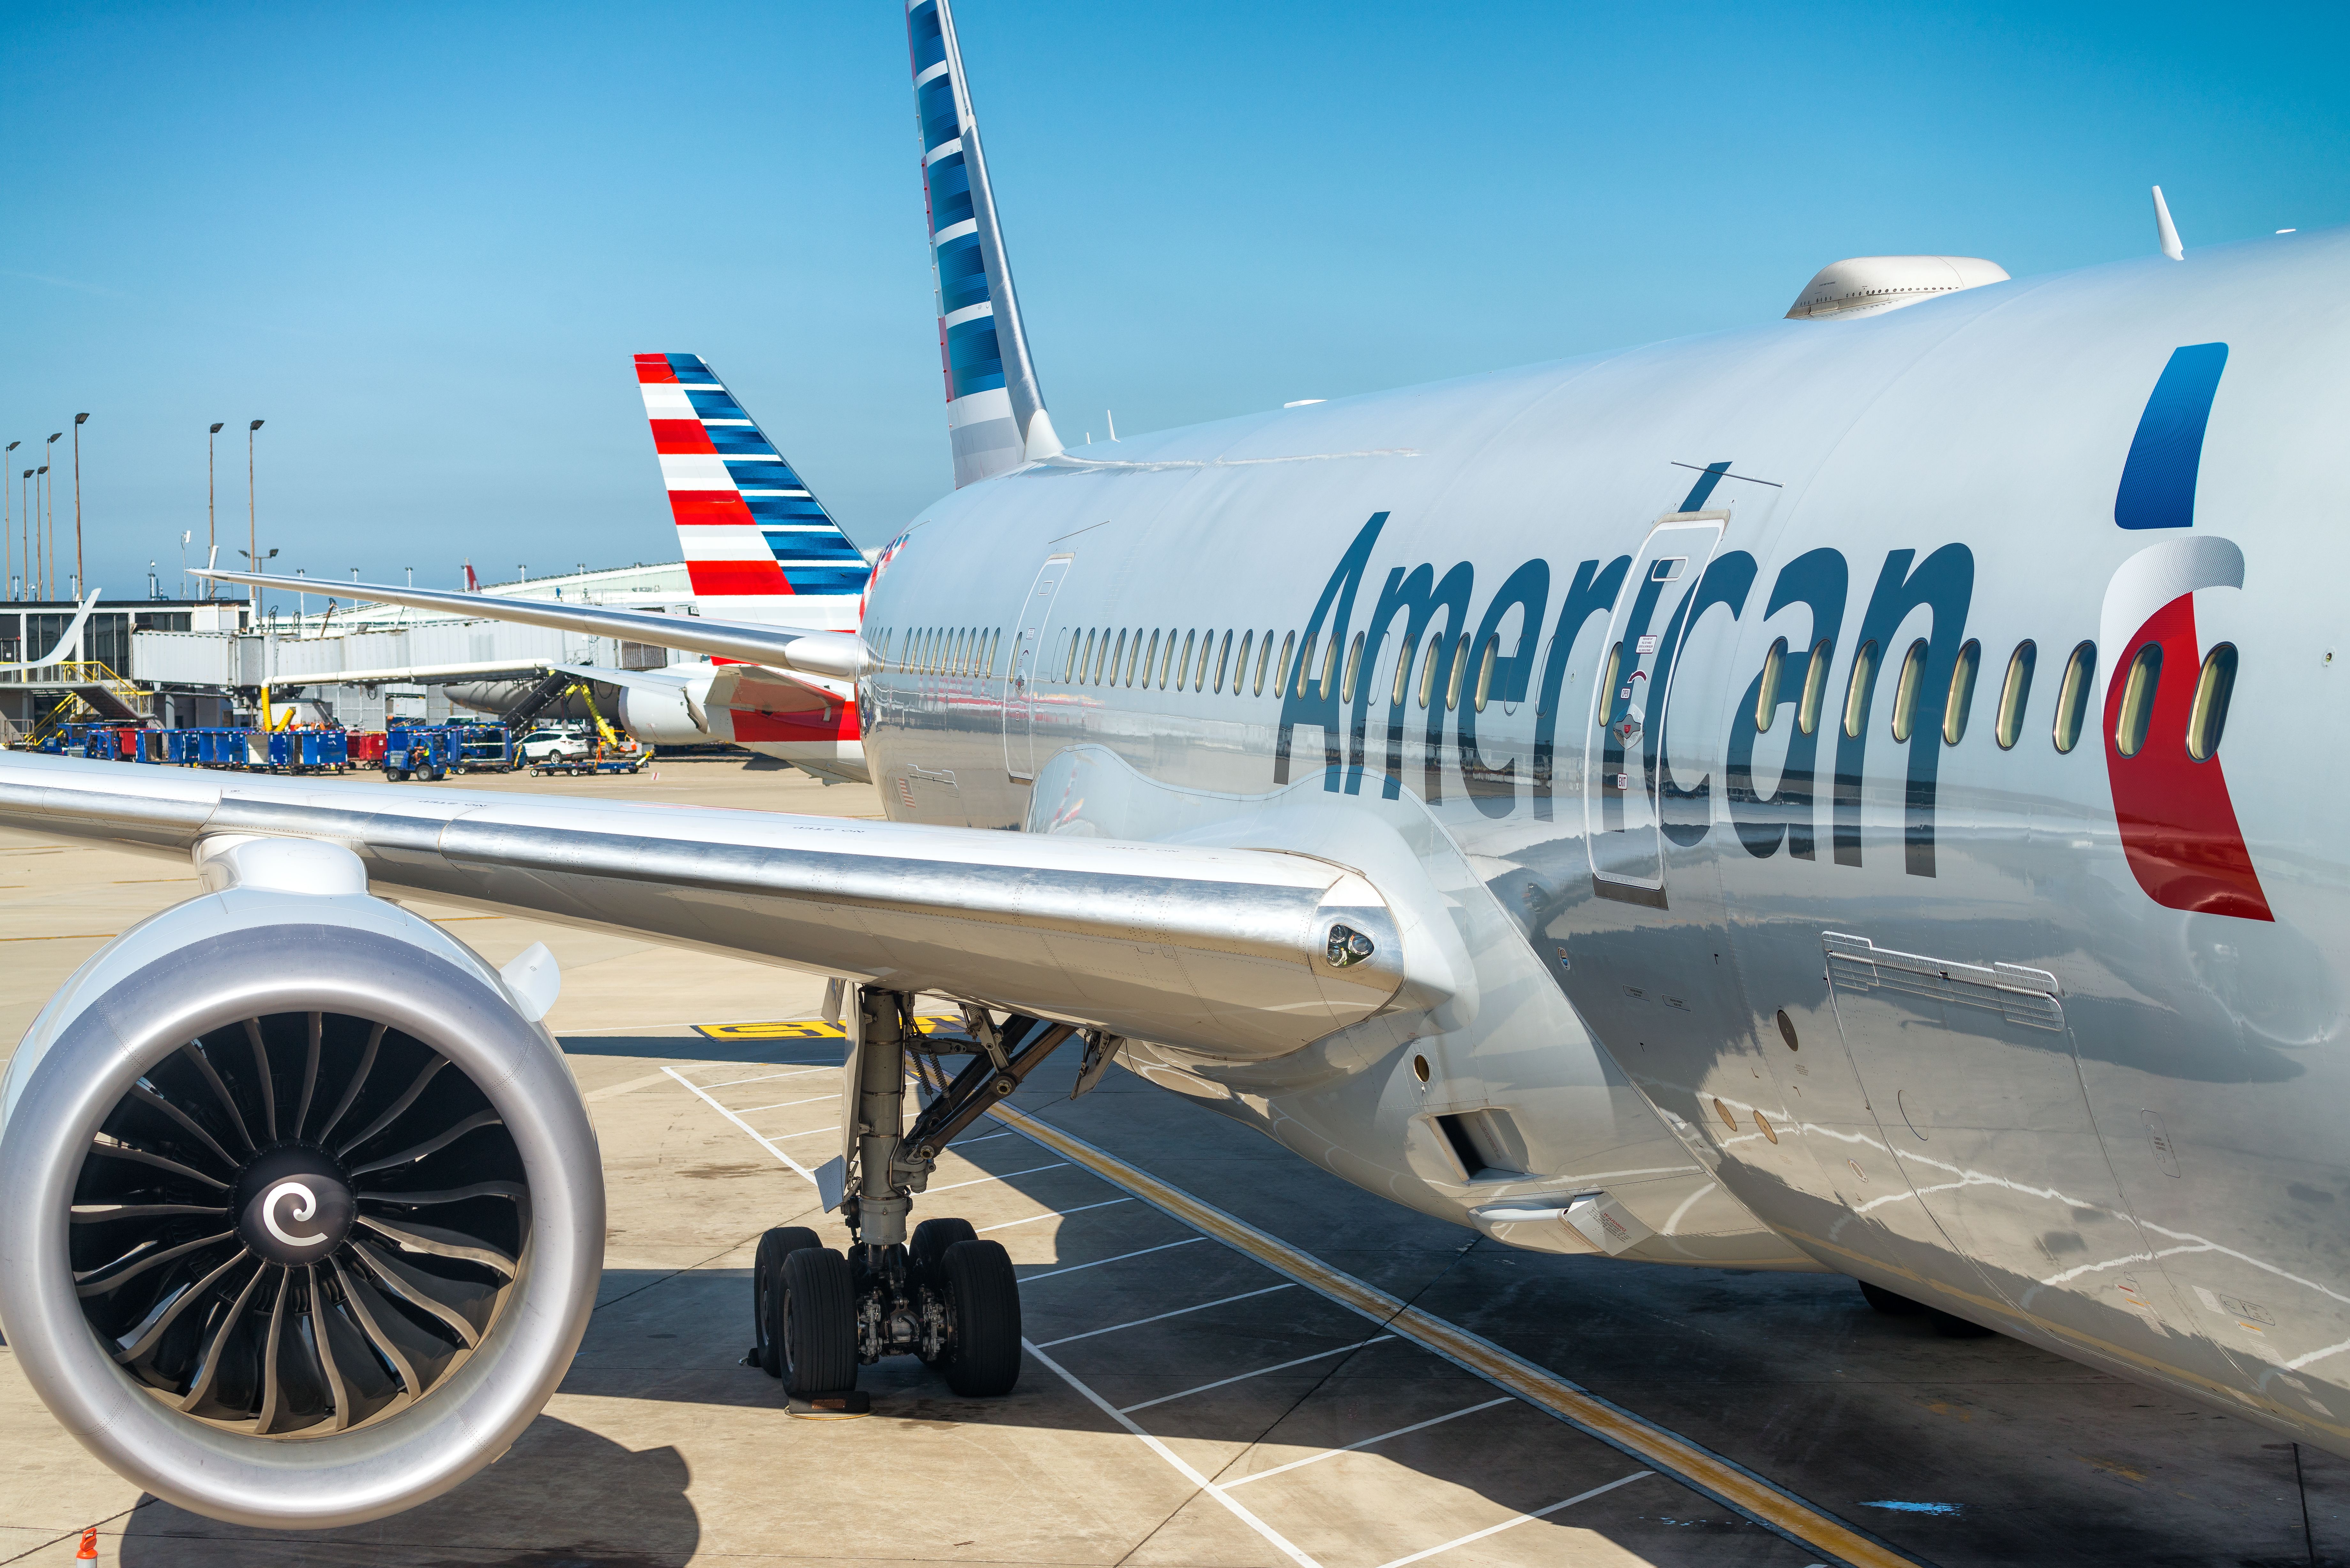 An American Airlines aircraft parked at the gate.